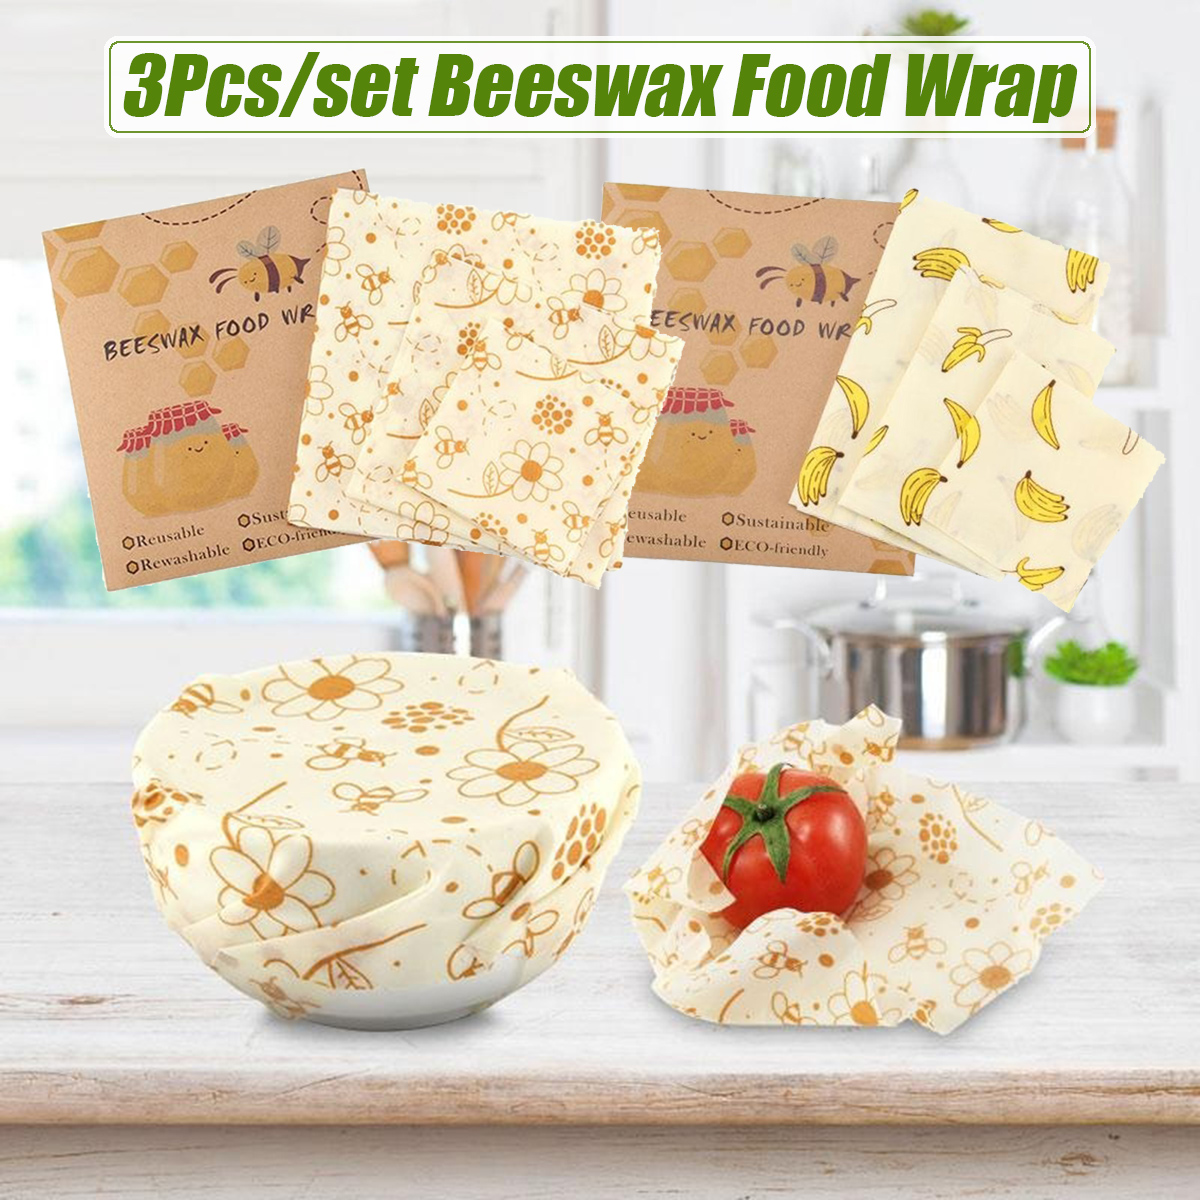 Safety-Beeswax-Food-Wrap-Fresh-Keeping-Reusable-Paper-Seal-Storage-Cover-1583302-2